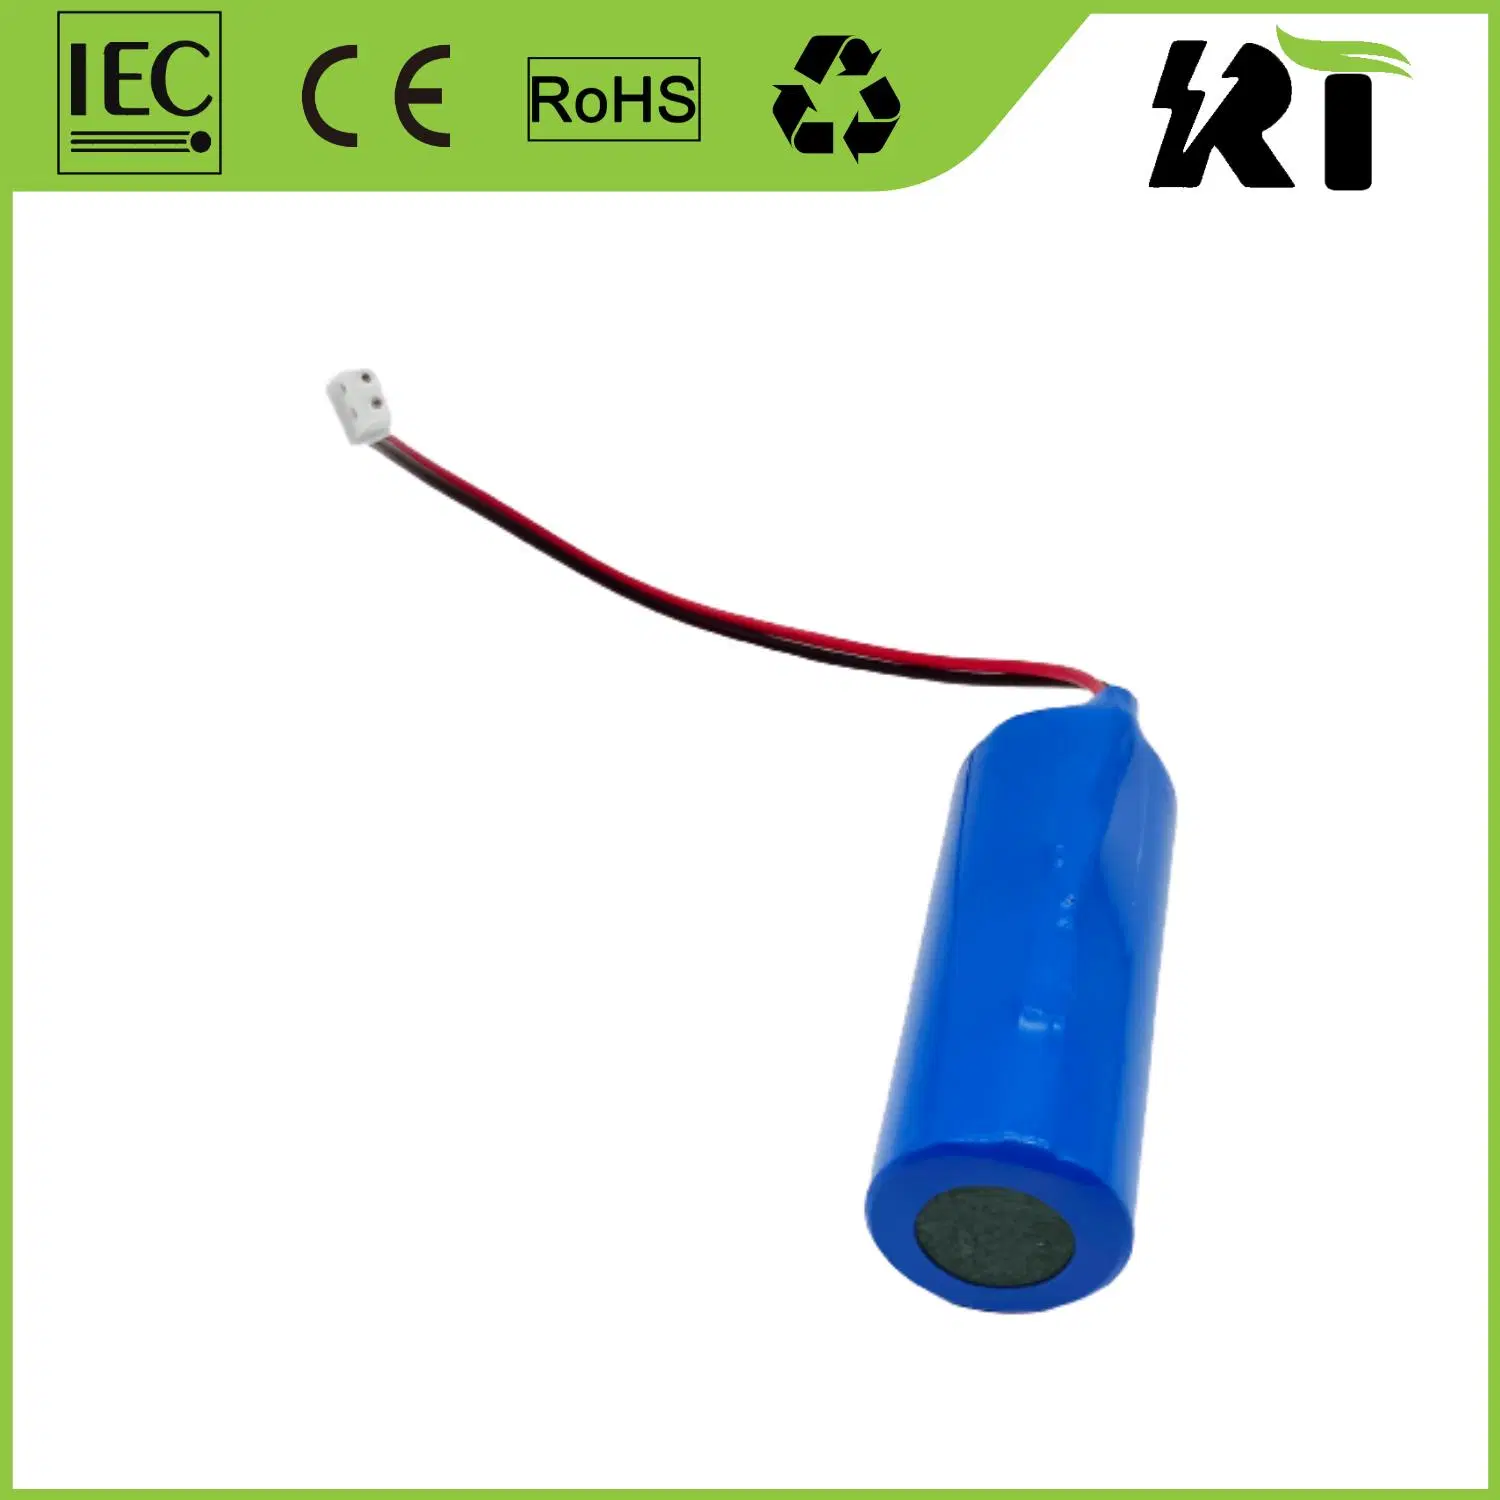 Li-ion Rechargeable Battery 3.6V 18650 2200mAh Storage Battery Pack